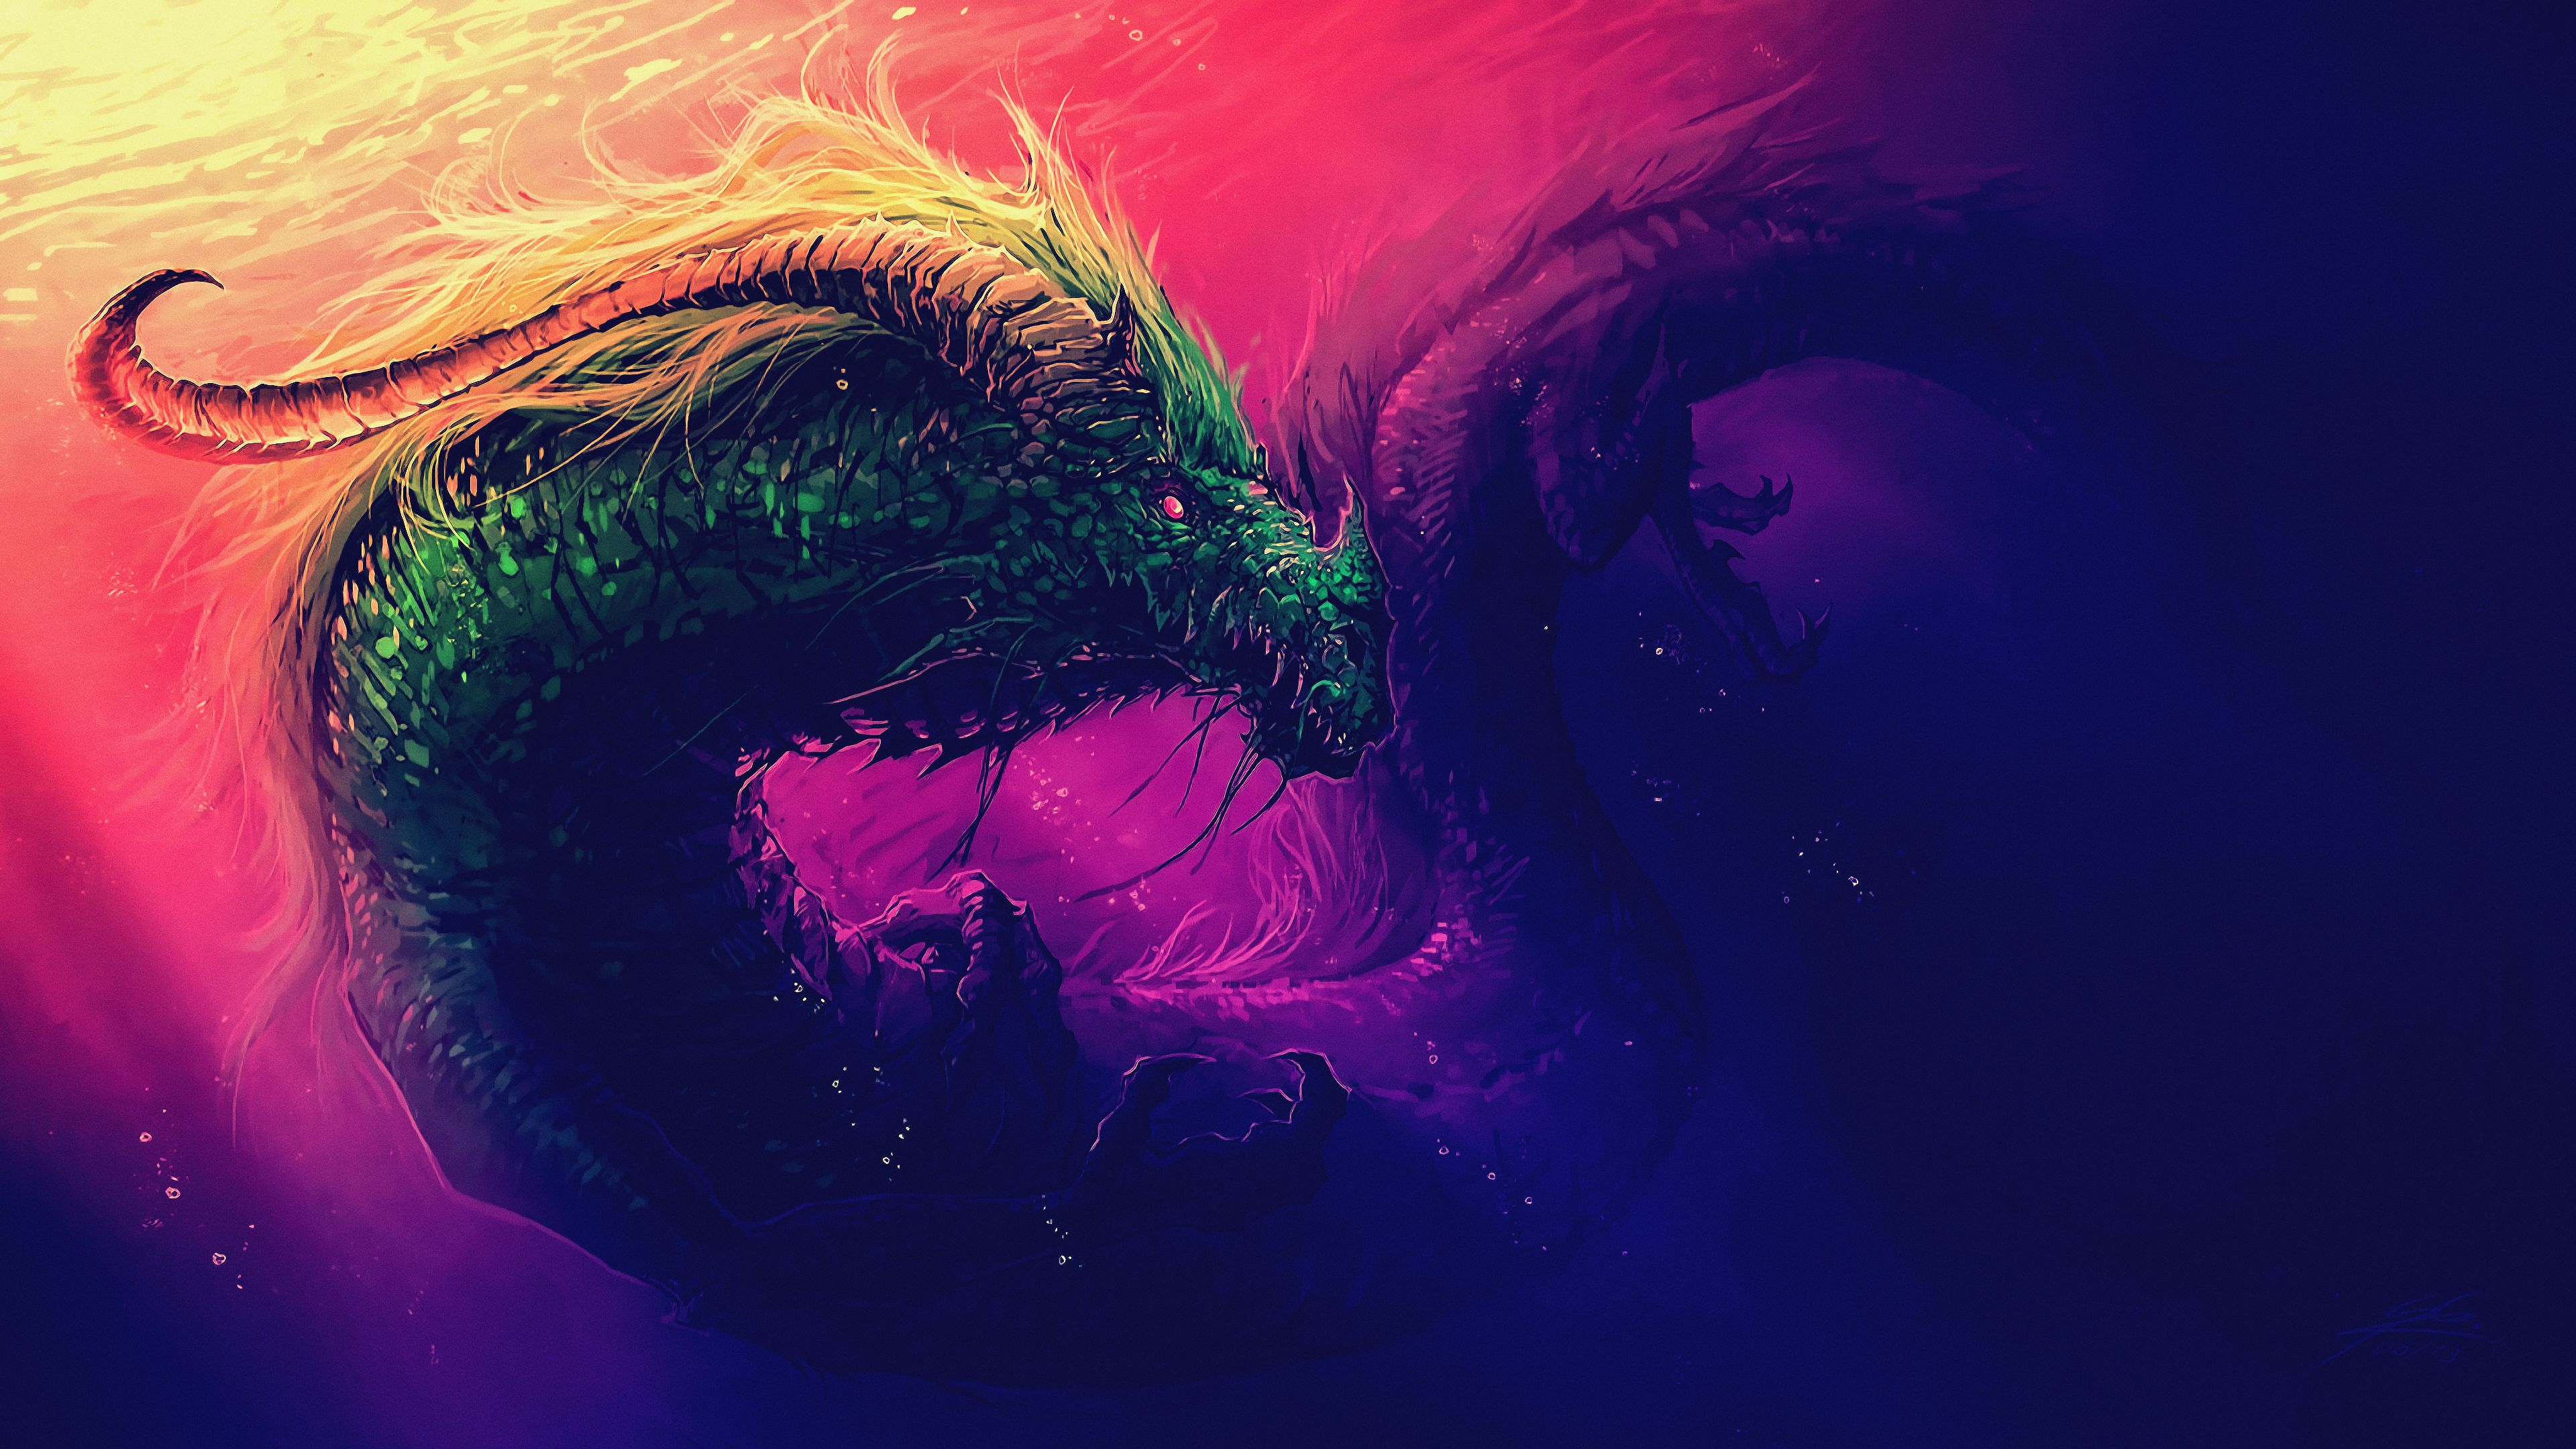 Colors Dragon 4k Ultra HD Wallpaper. HD Wallpaper, HD Background, Tumblr Background, Image, Picture